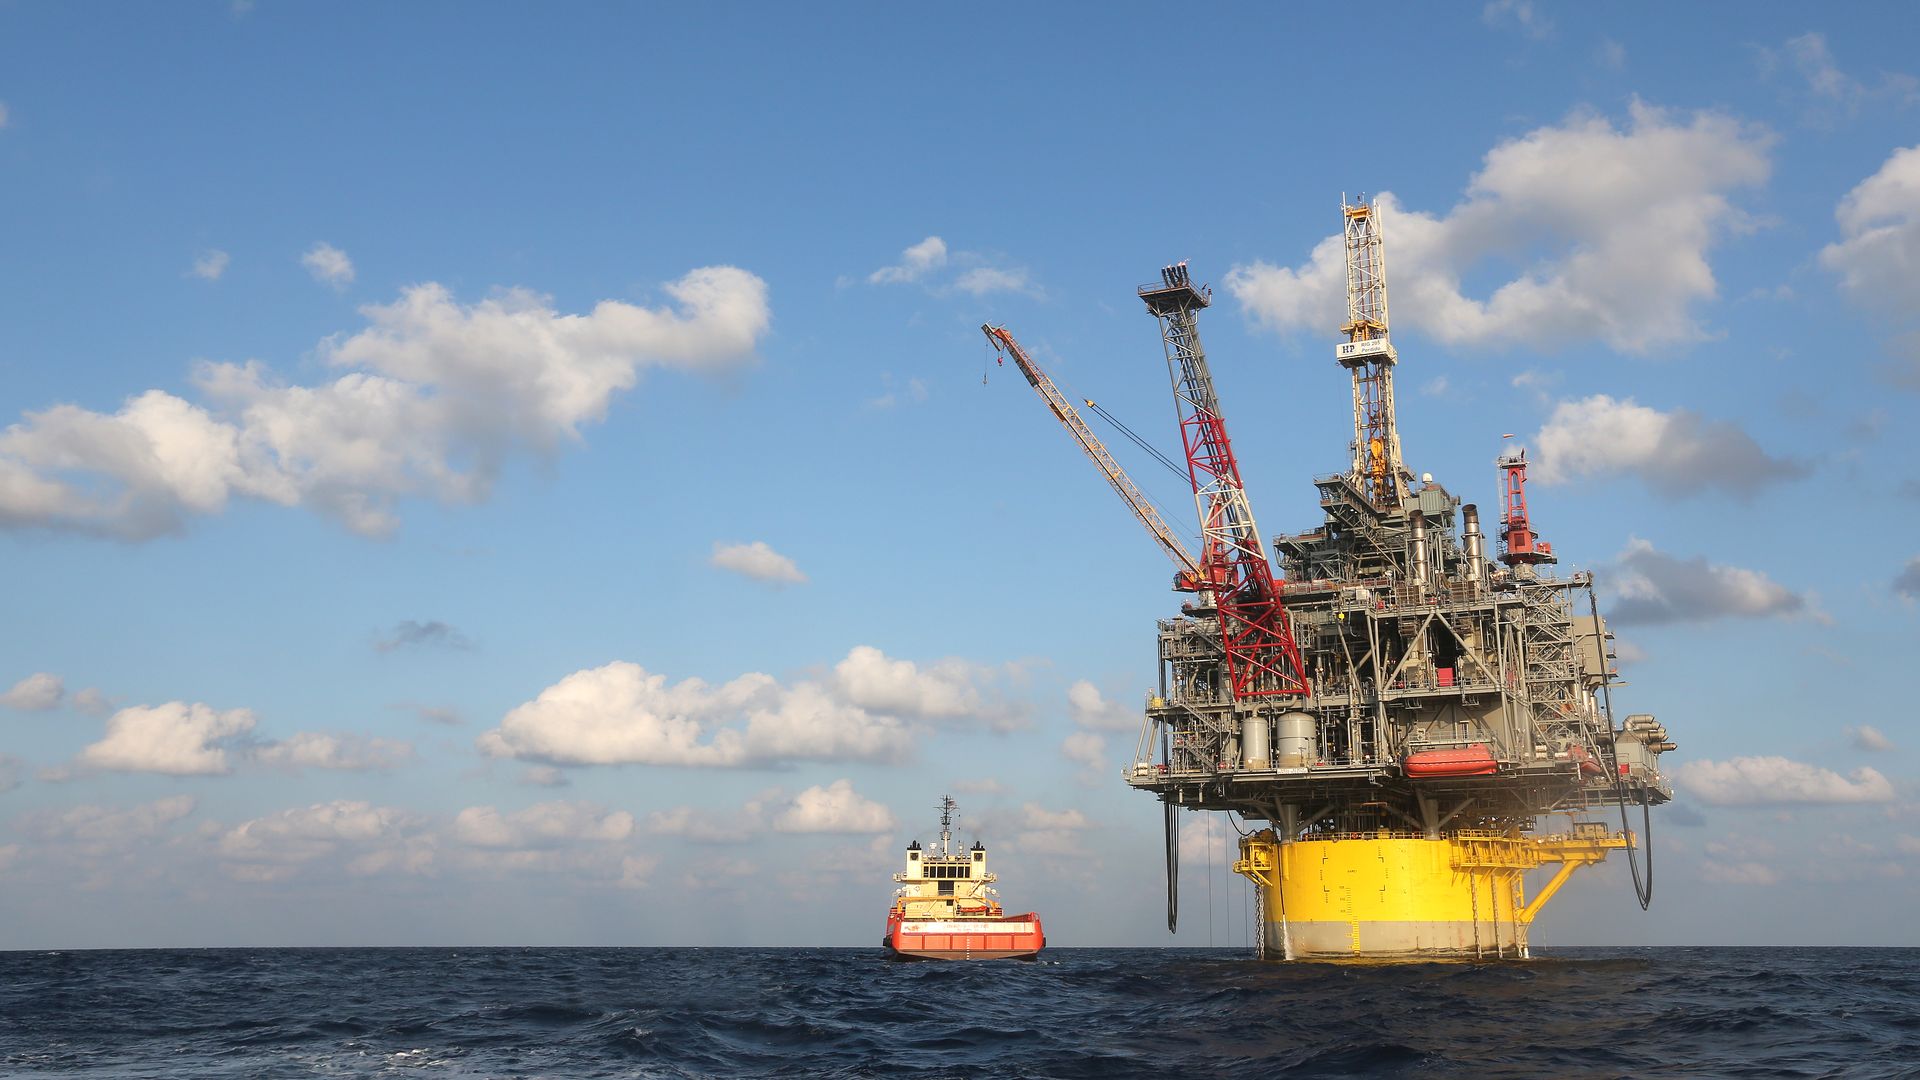 Offshore drilling and production platform